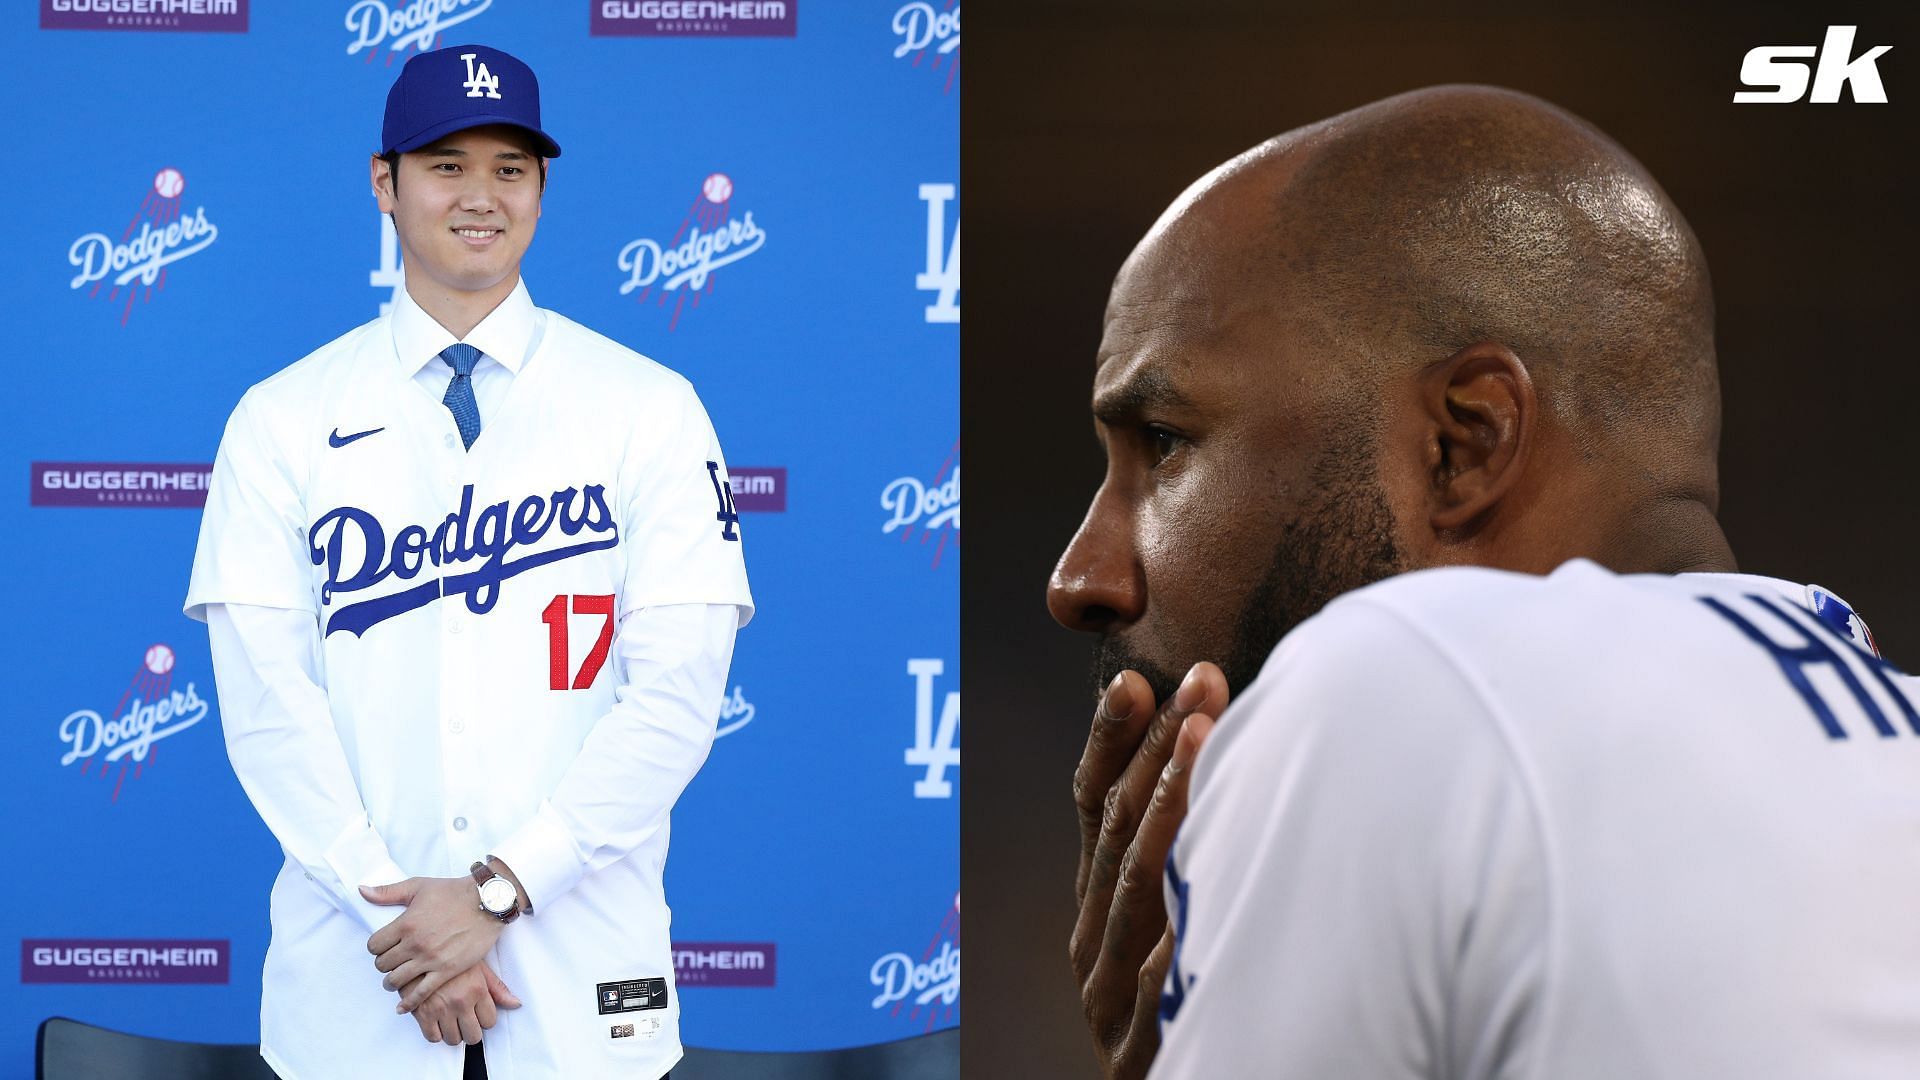 Dodgers OF Jason Heyward claims Ohtani is the best person to answer media